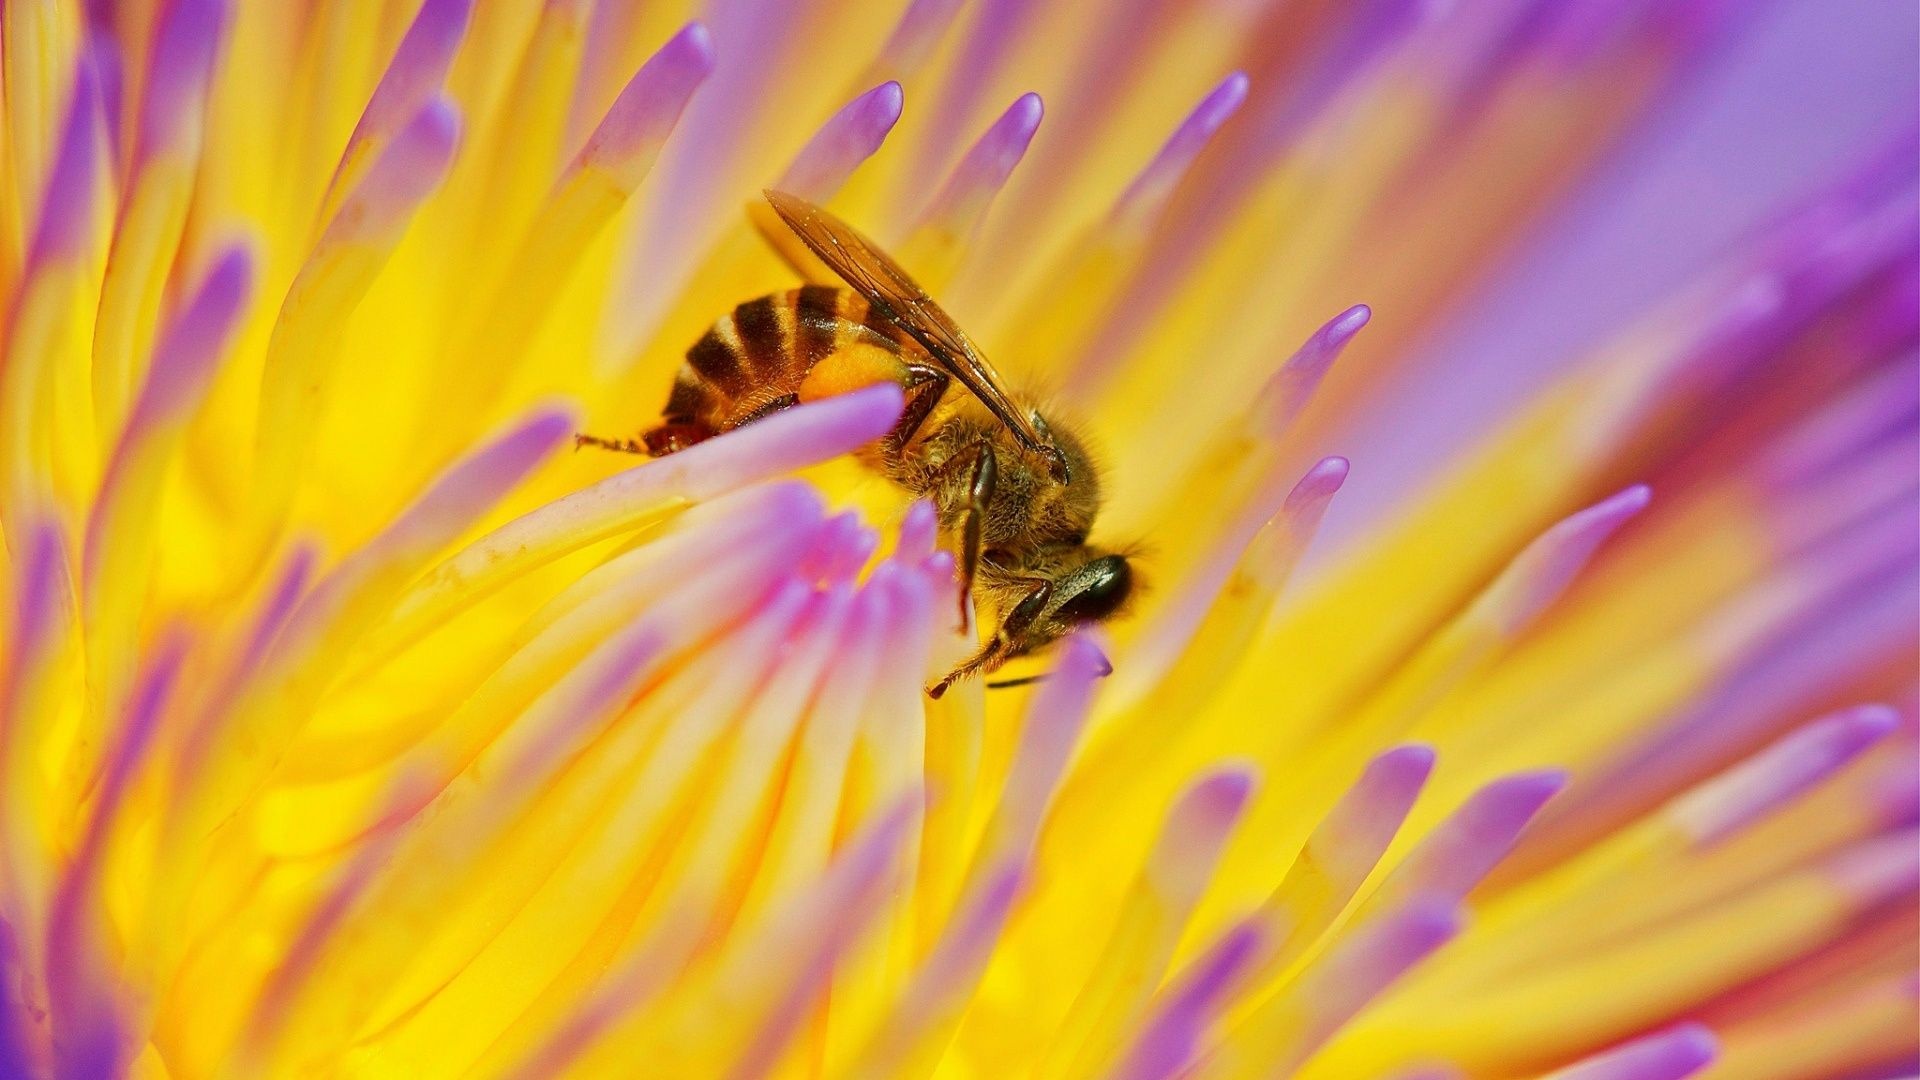 Bee: Insects trying to collect the most pollen, nectar, or floral oils possible. 1920x1080 Full HD Wallpaper.